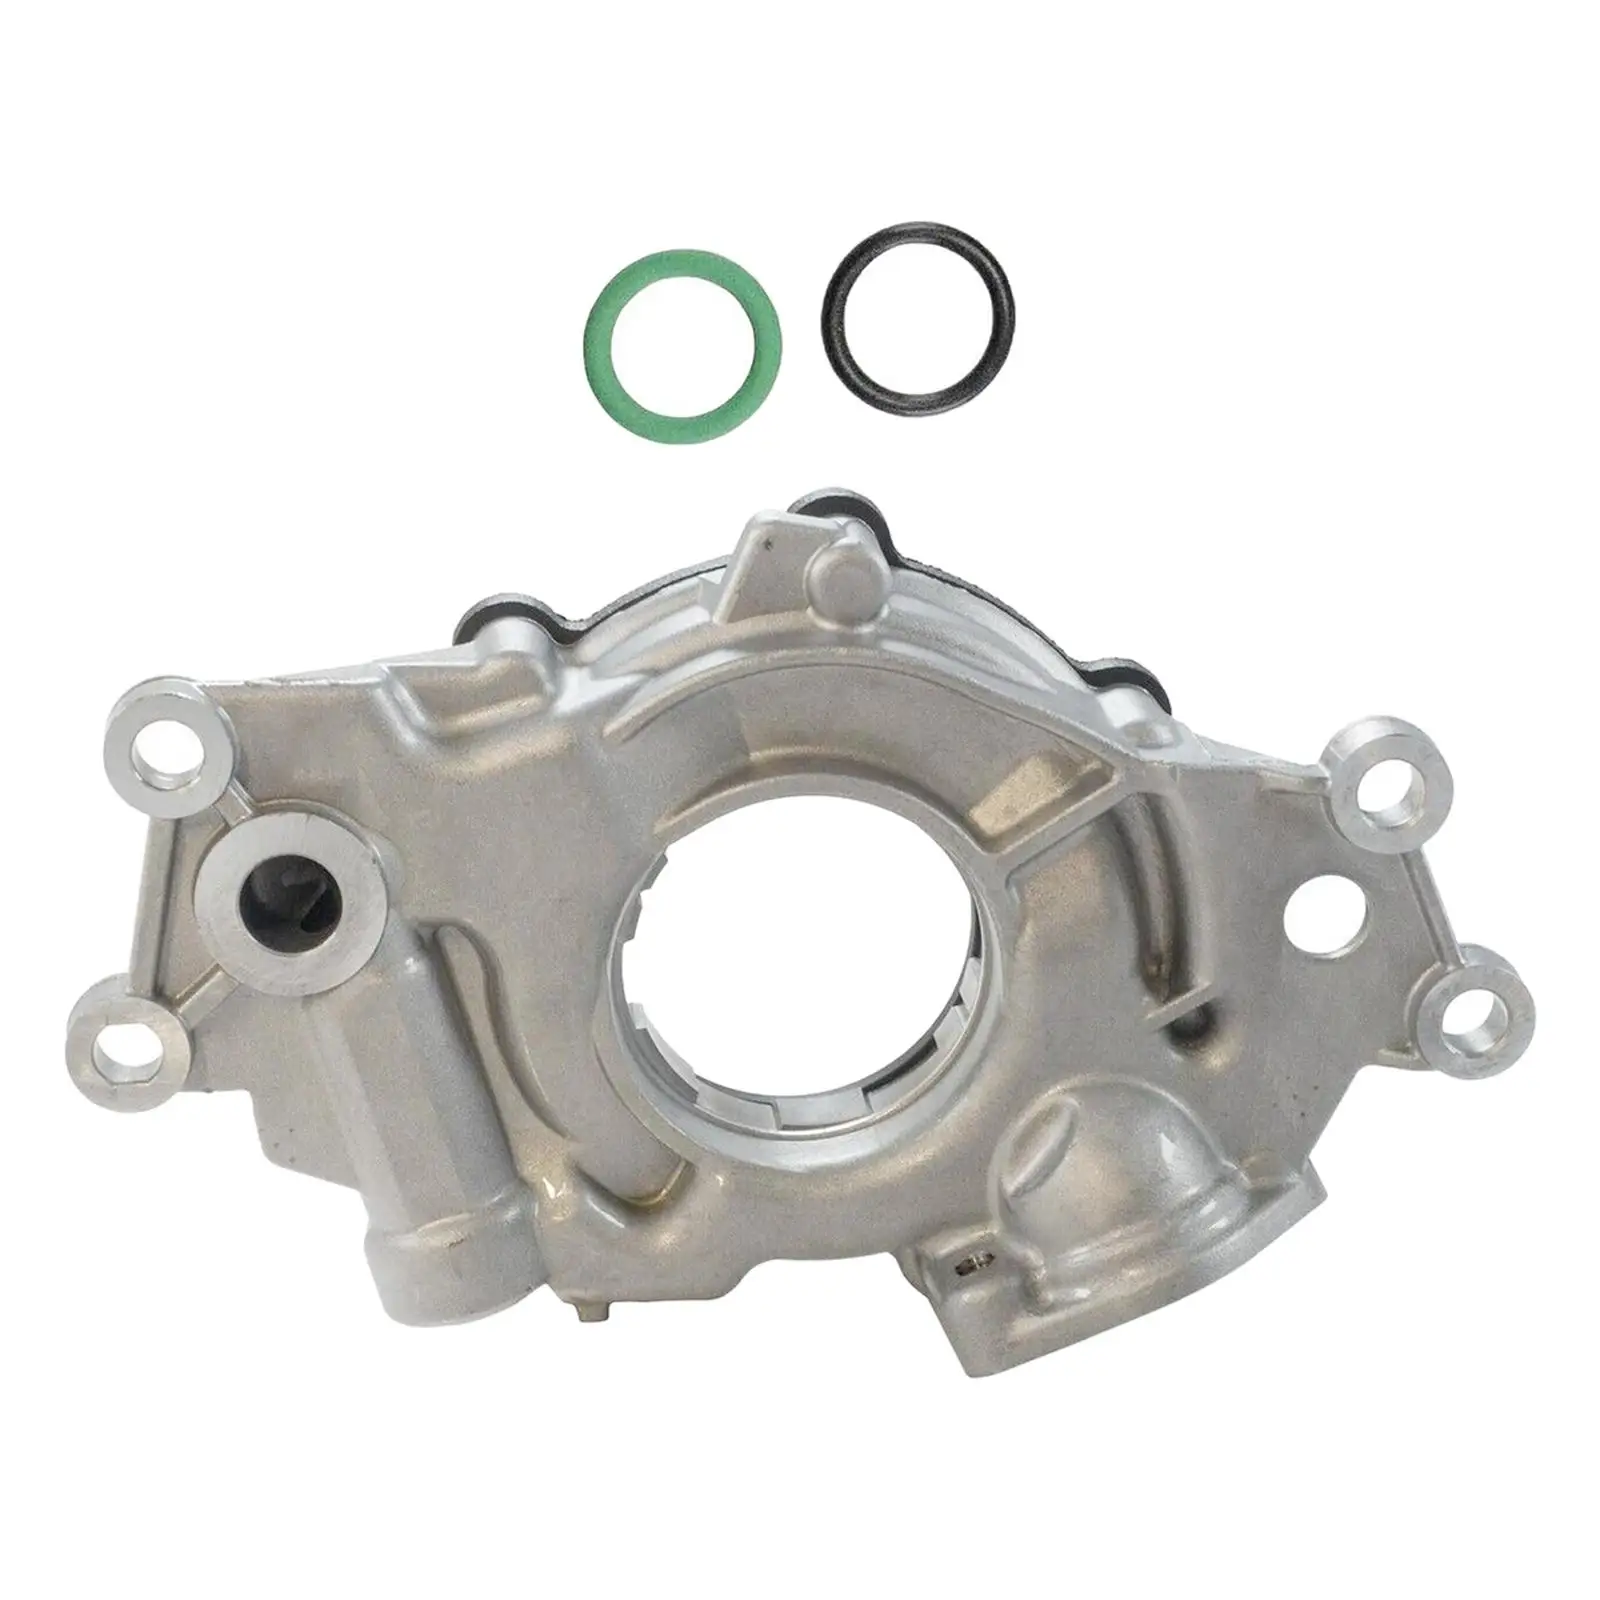 Oil Pump High Performance Professional Easy to Install Alloy Quality M365hv High Volume Oil Pumps for L92 L99 LS4 L9H Lsa